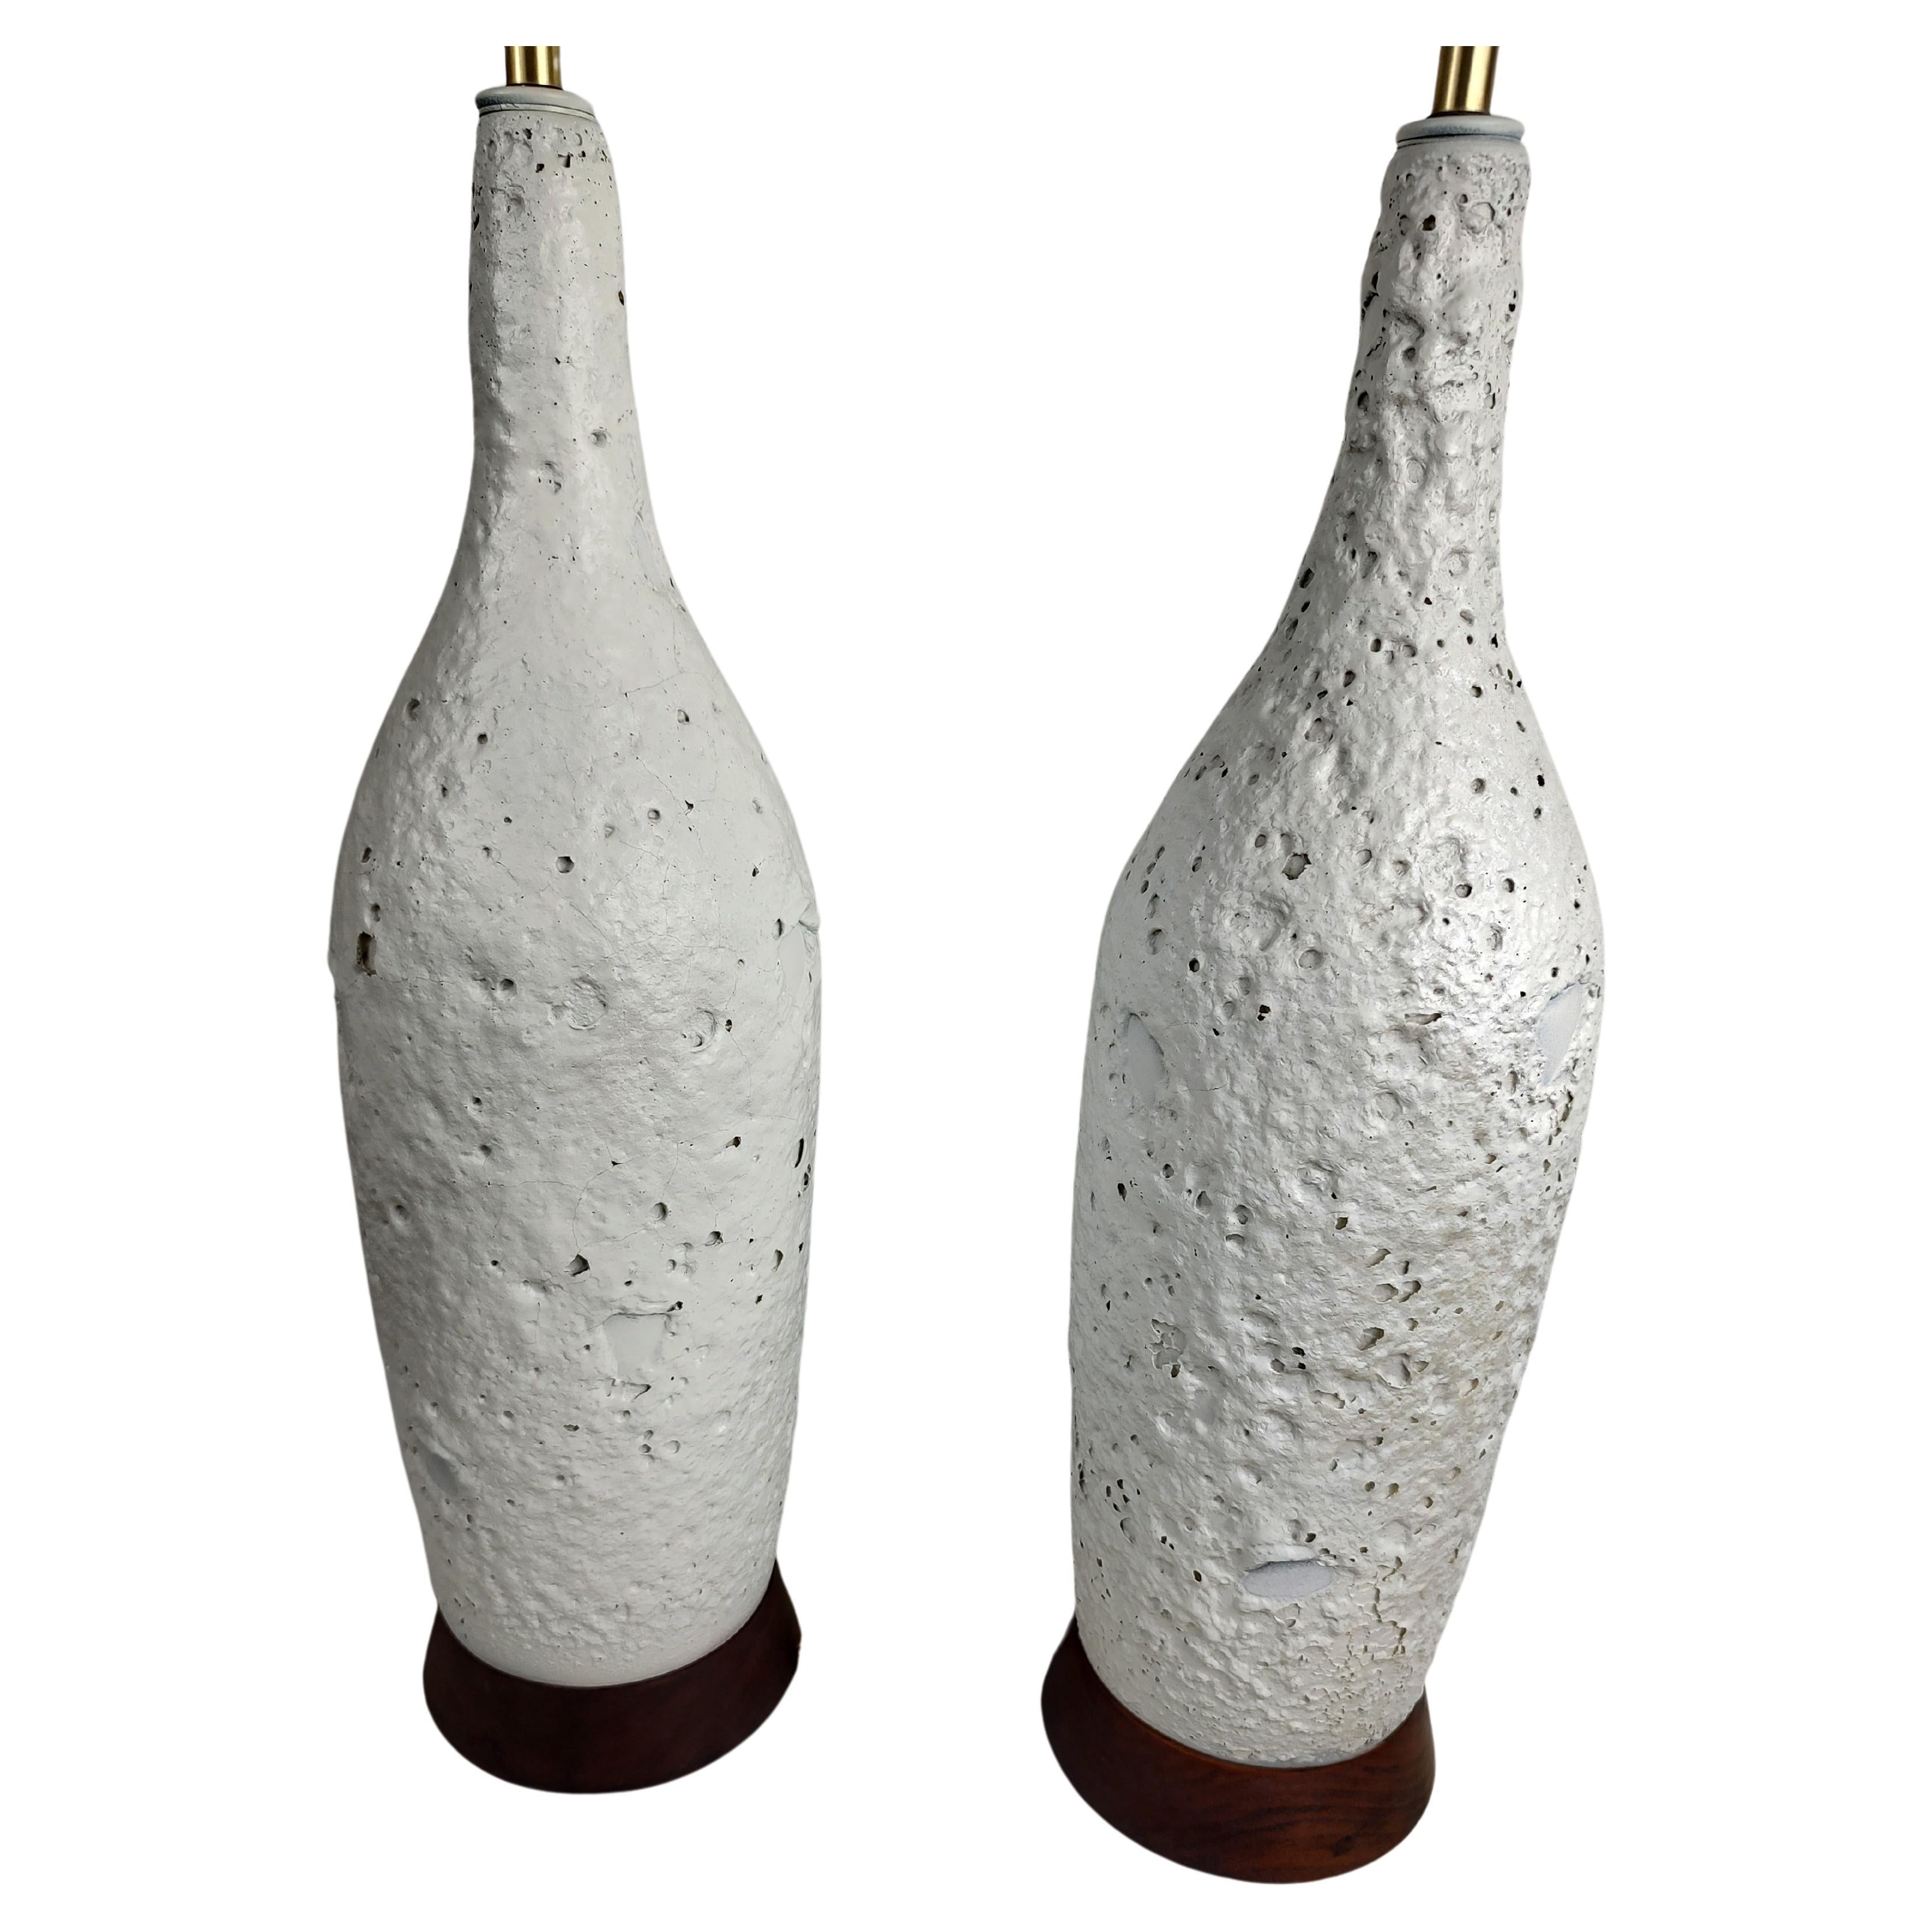 Pair of Mid-Century Modern Sculptural Volcanic Lava Like Textured Table Lamps In Good Condition For Sale In Port Jervis, NY